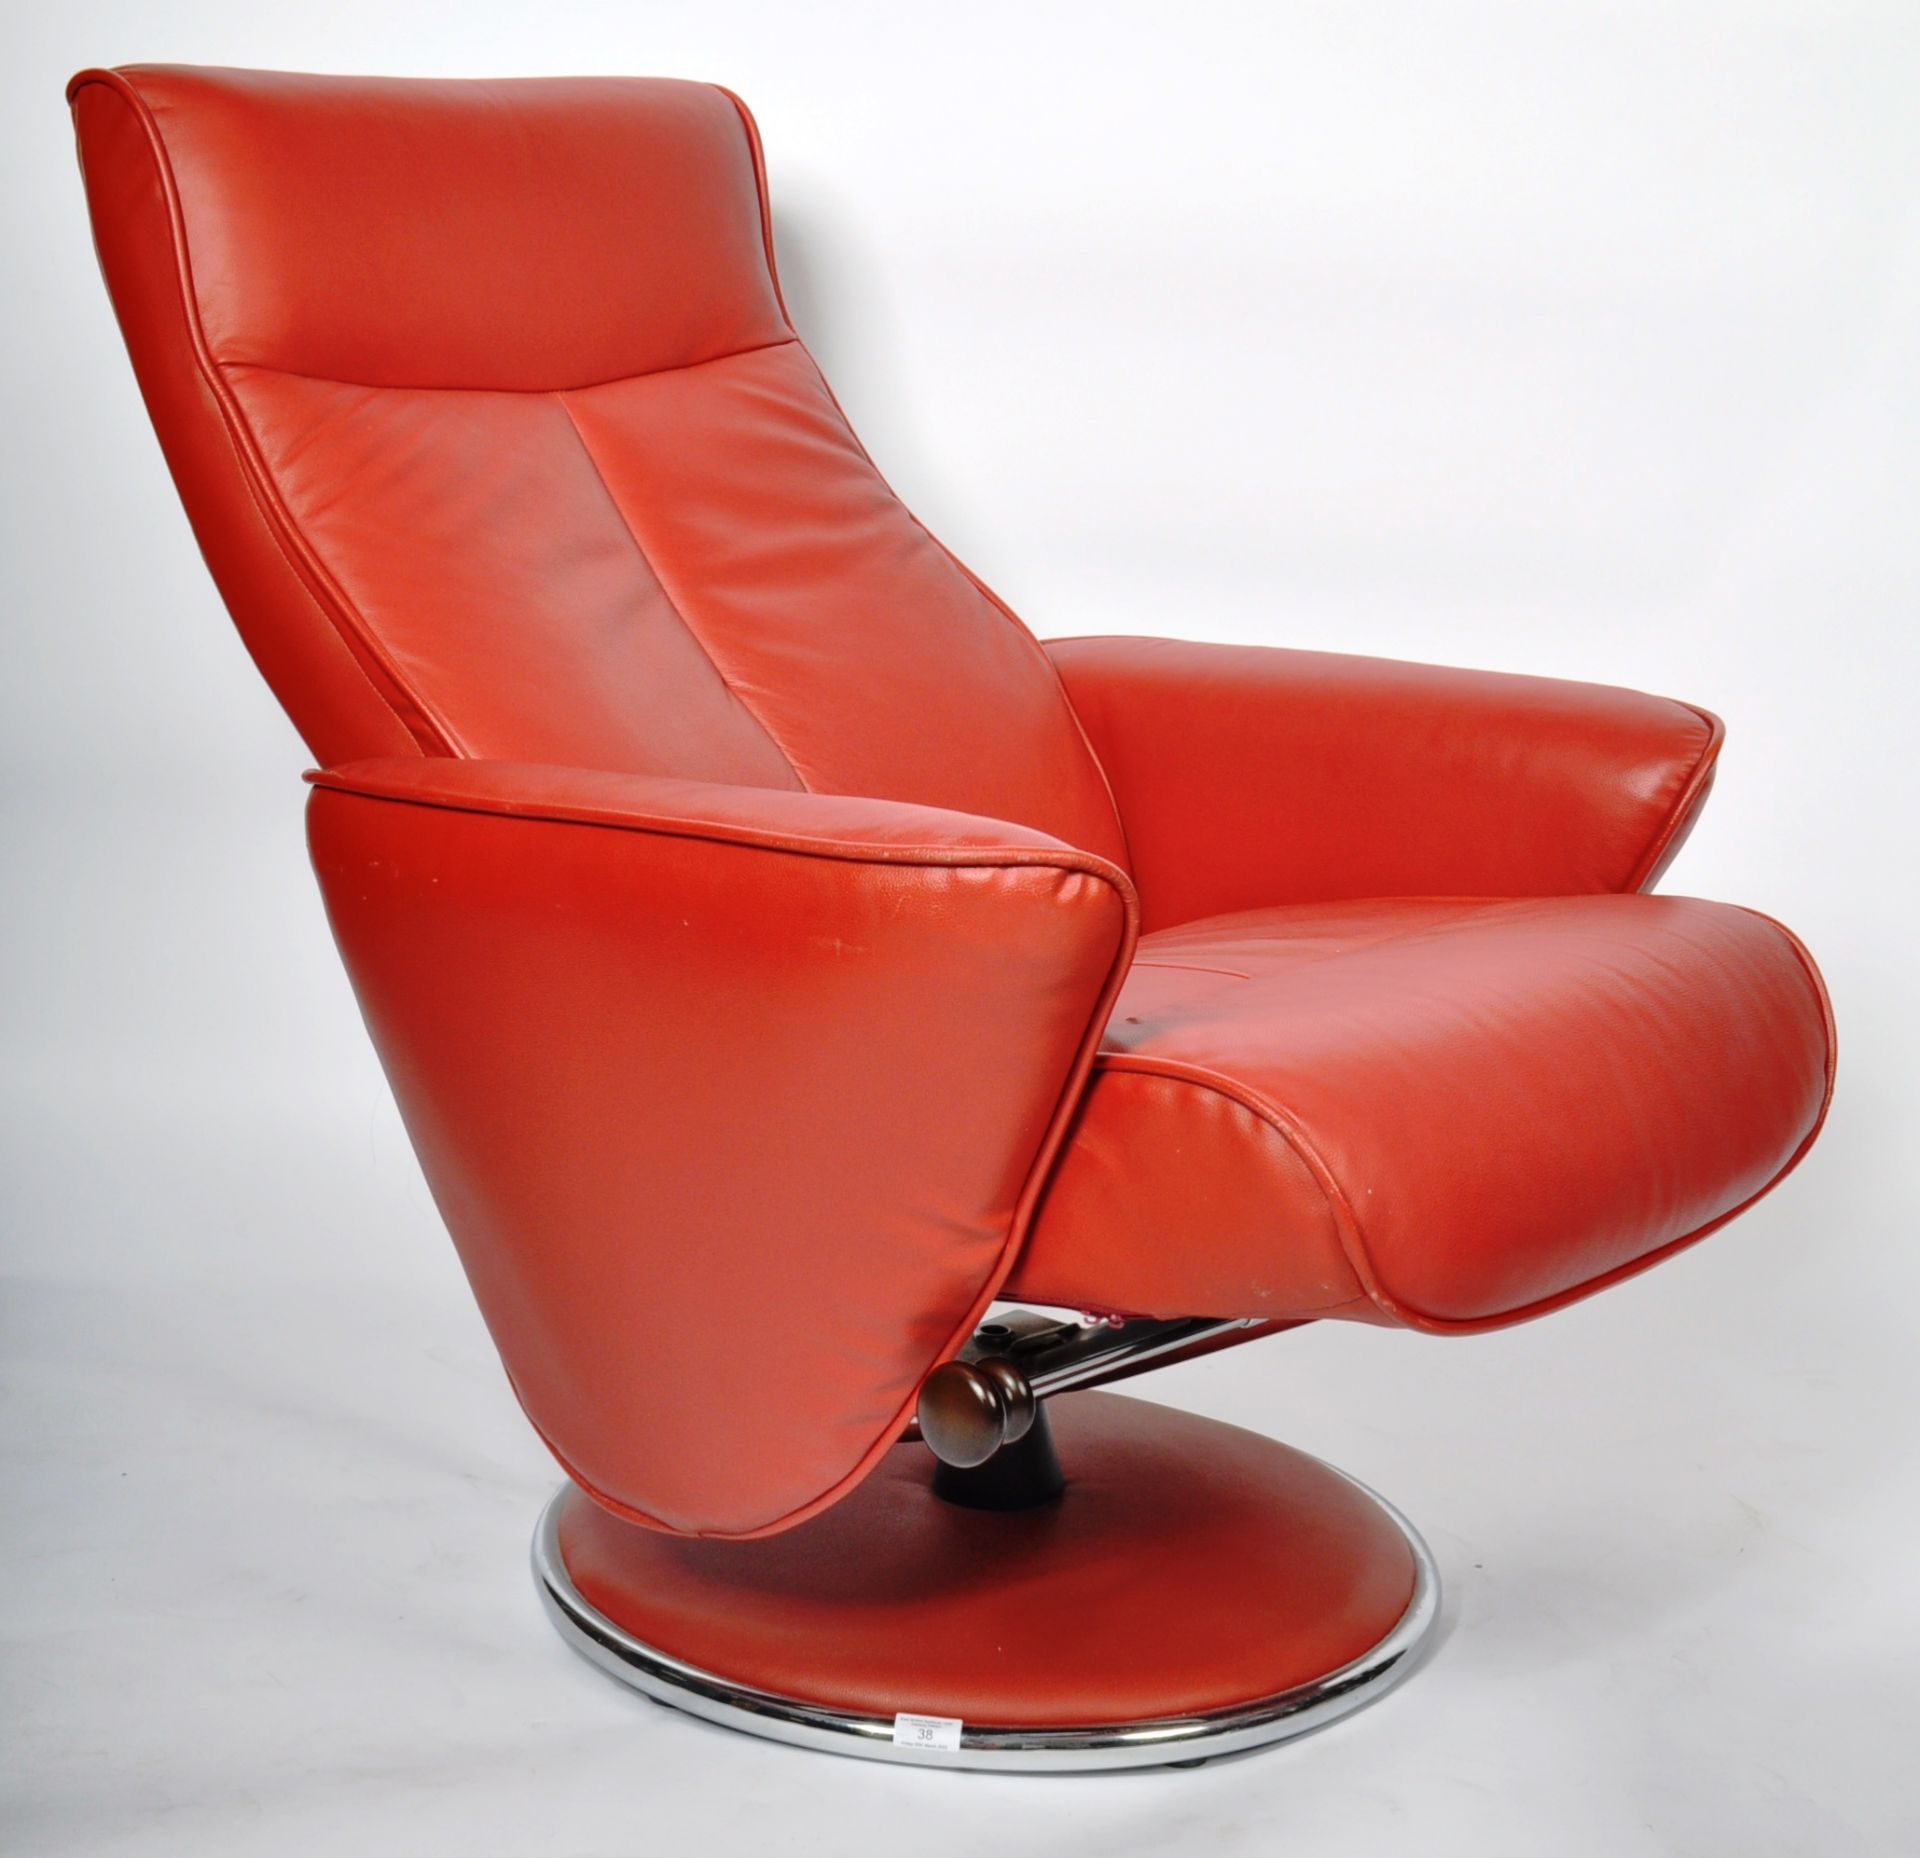 G PLAN - CONTEMPORARY RED LEATHER RECLINING SWIVEL ARMCHAIR - Image 6 of 7